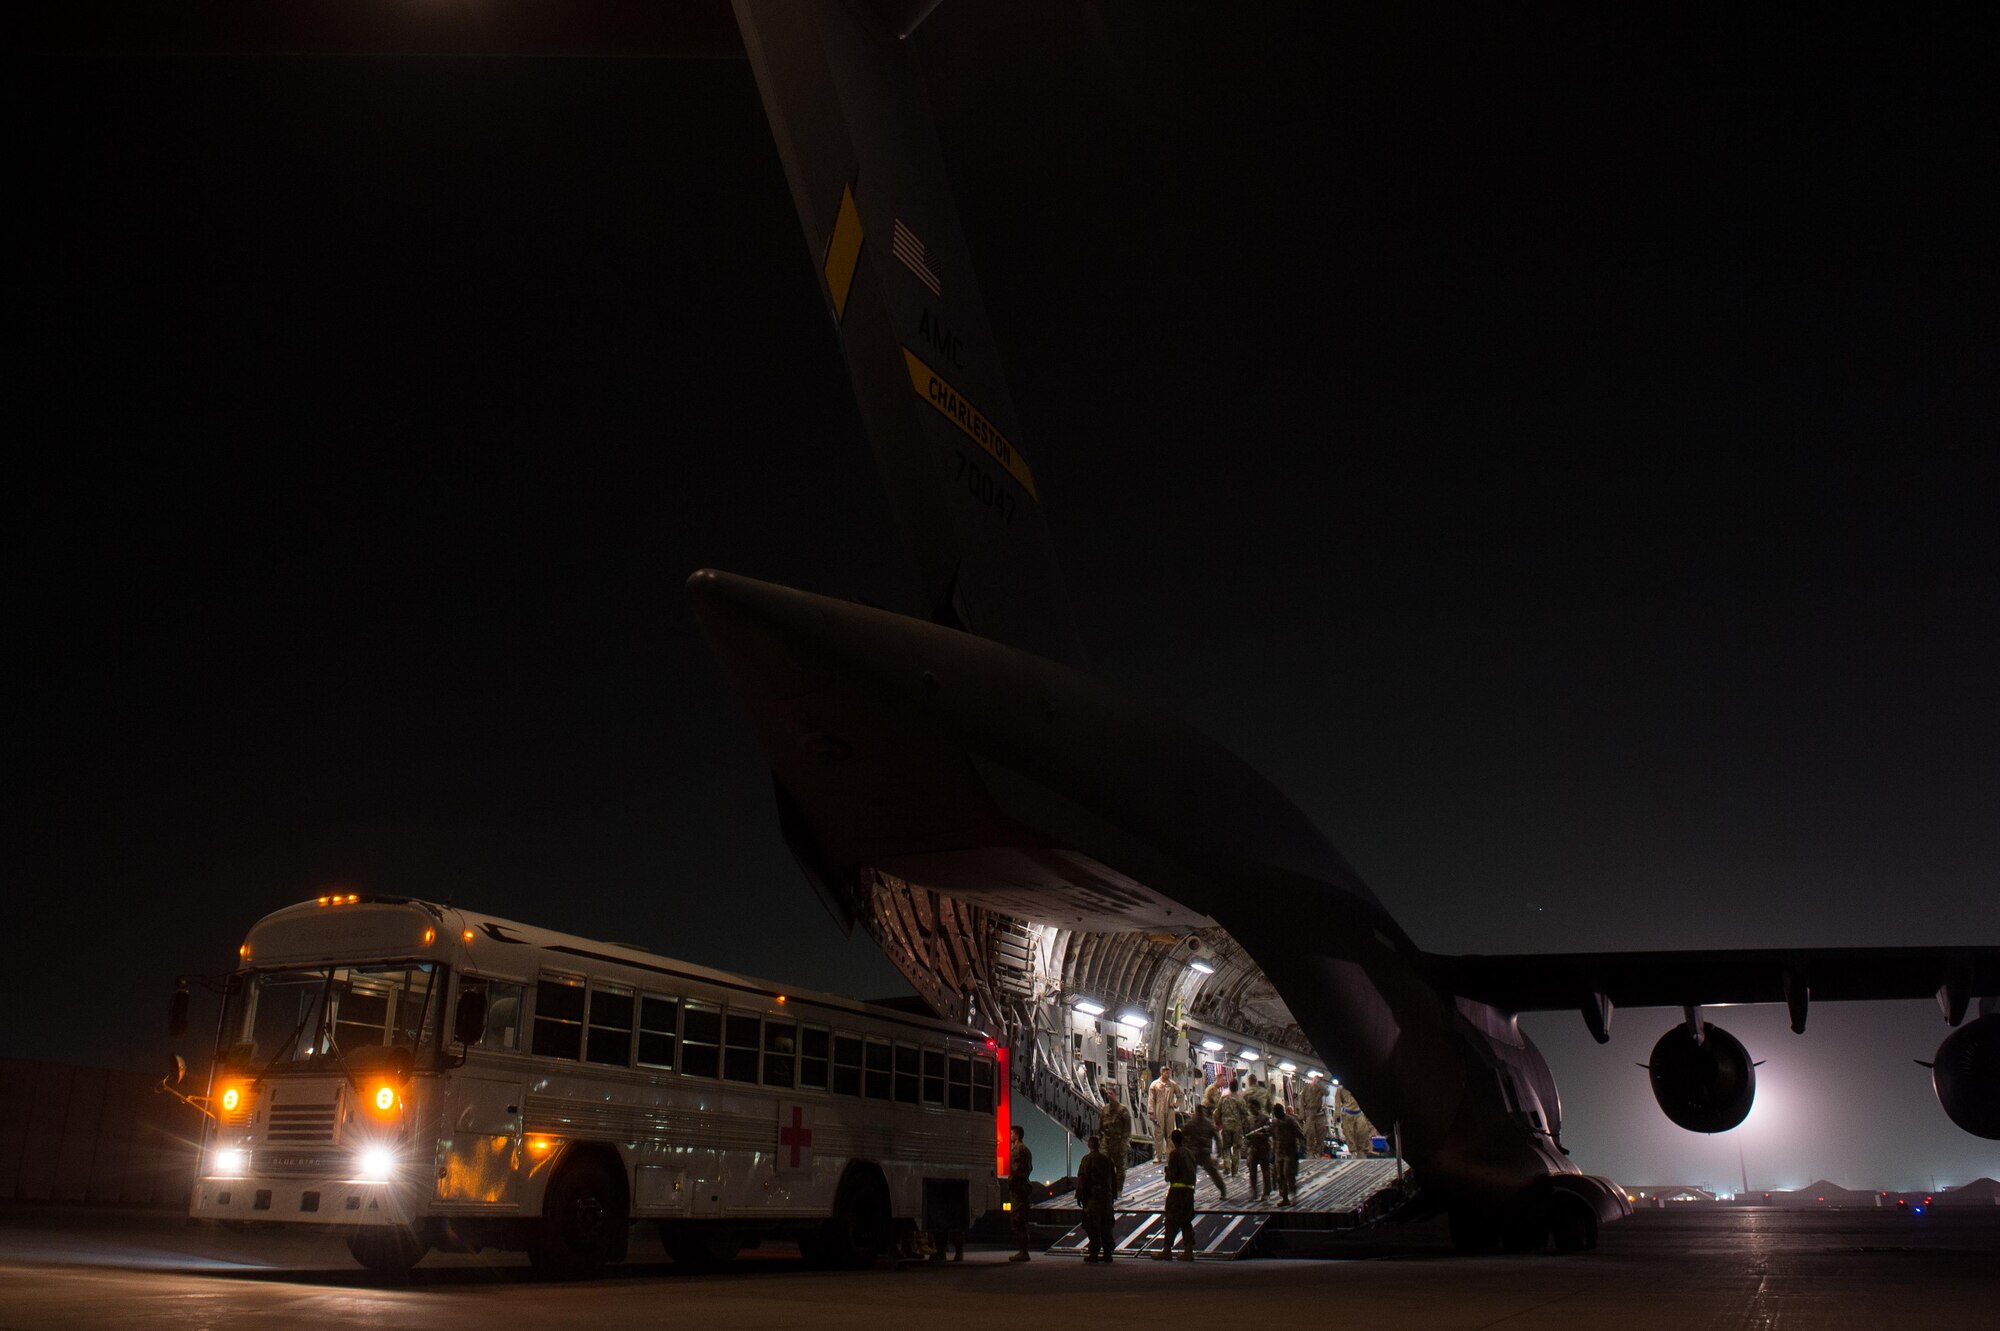 U.S. Airmen assigned to the 455th Expeditionary Aeromedical Evacuation Squadron and the 455th Expeditionary Medical Group load injured Service members onto a C-17 Globemaster III aircraft on the flight line at Bagram Airfield, Afghanistan, Aug. 8, 2015.  The 455th EAES Airmen are charged with the responsibility of evacuating the sick and wounded from Central Command to higher echelons of medical care. (U.S. Air Force photo by Tech. Sgt. Joseph Swafford/Released) 